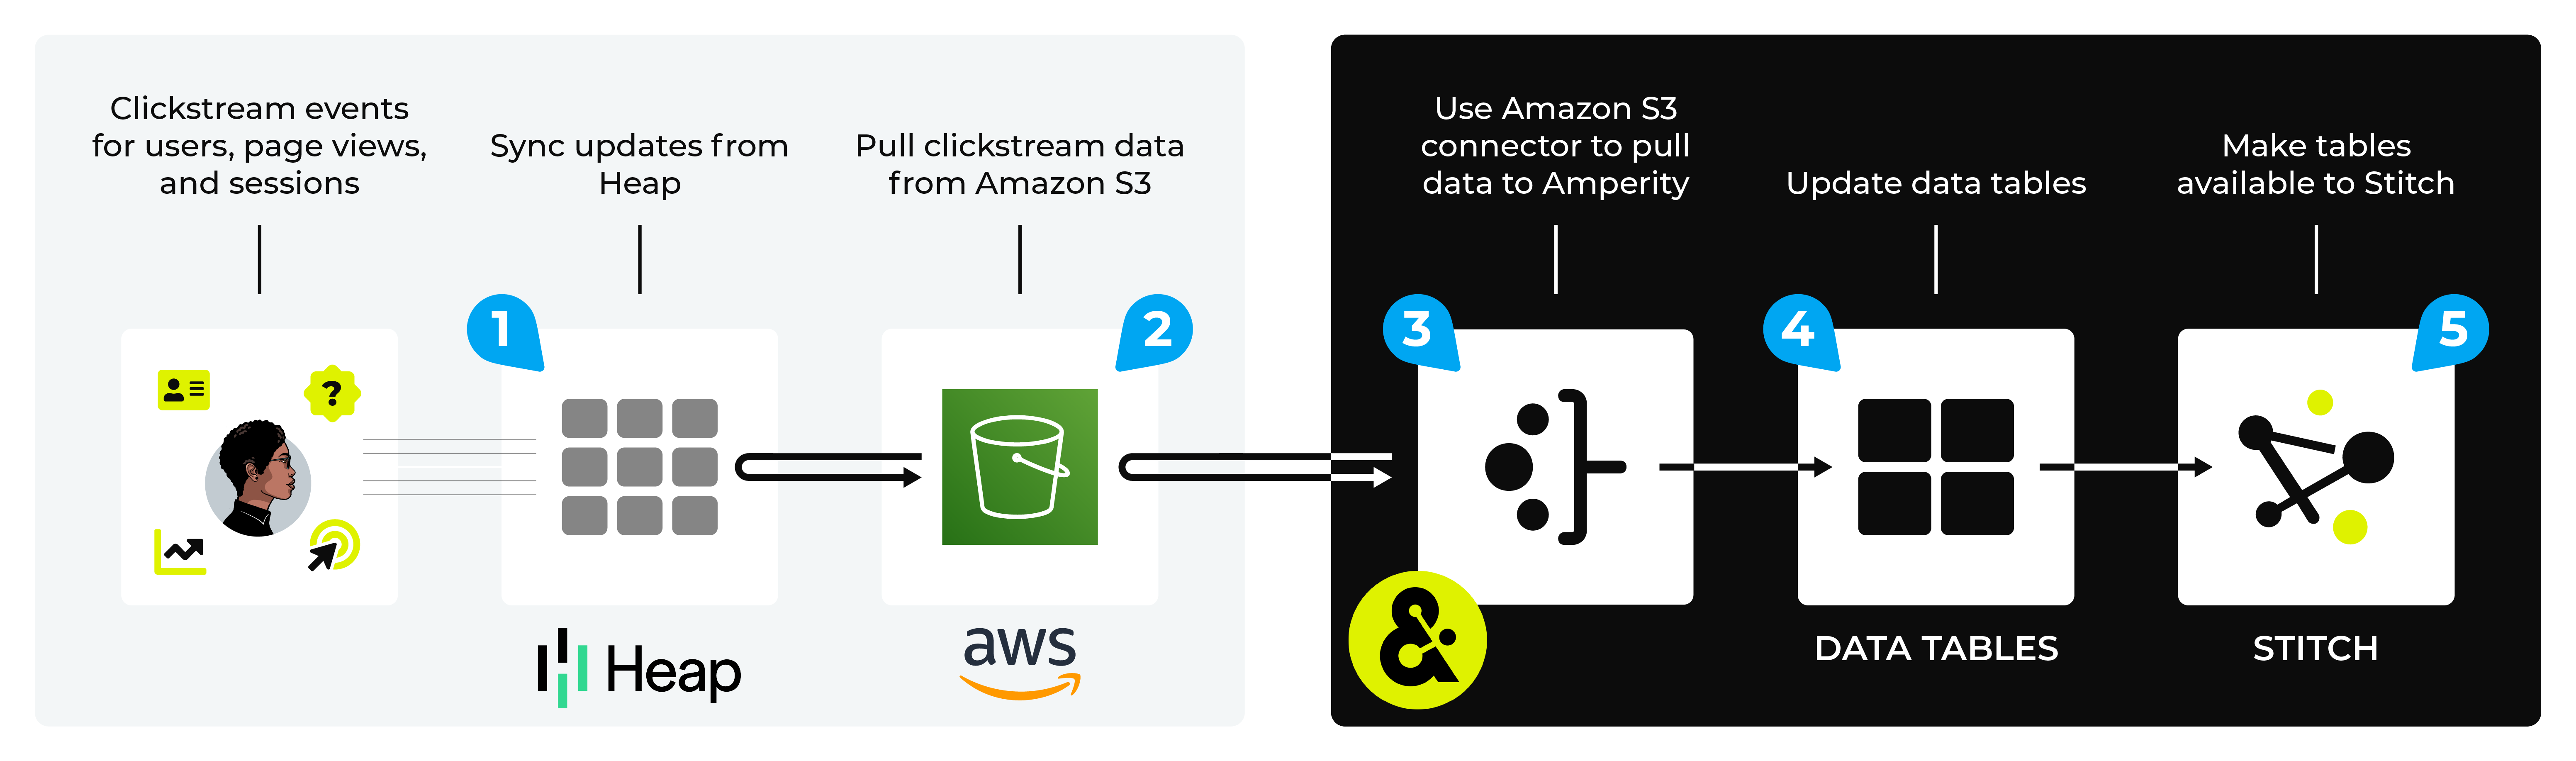 Pull clickstream data for users, page views, and sessions to Amperity from Heap.